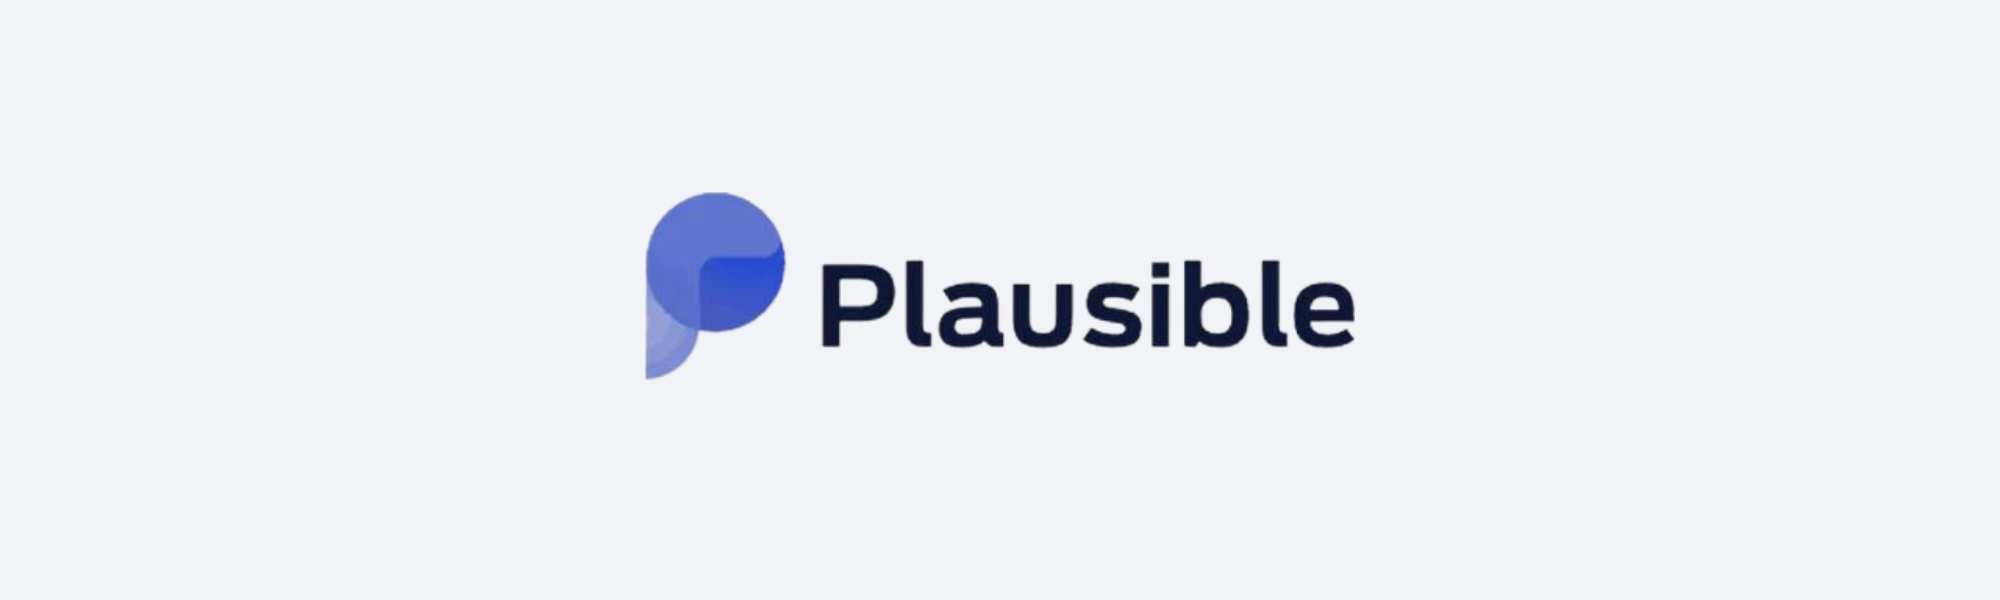 Logo Plausible